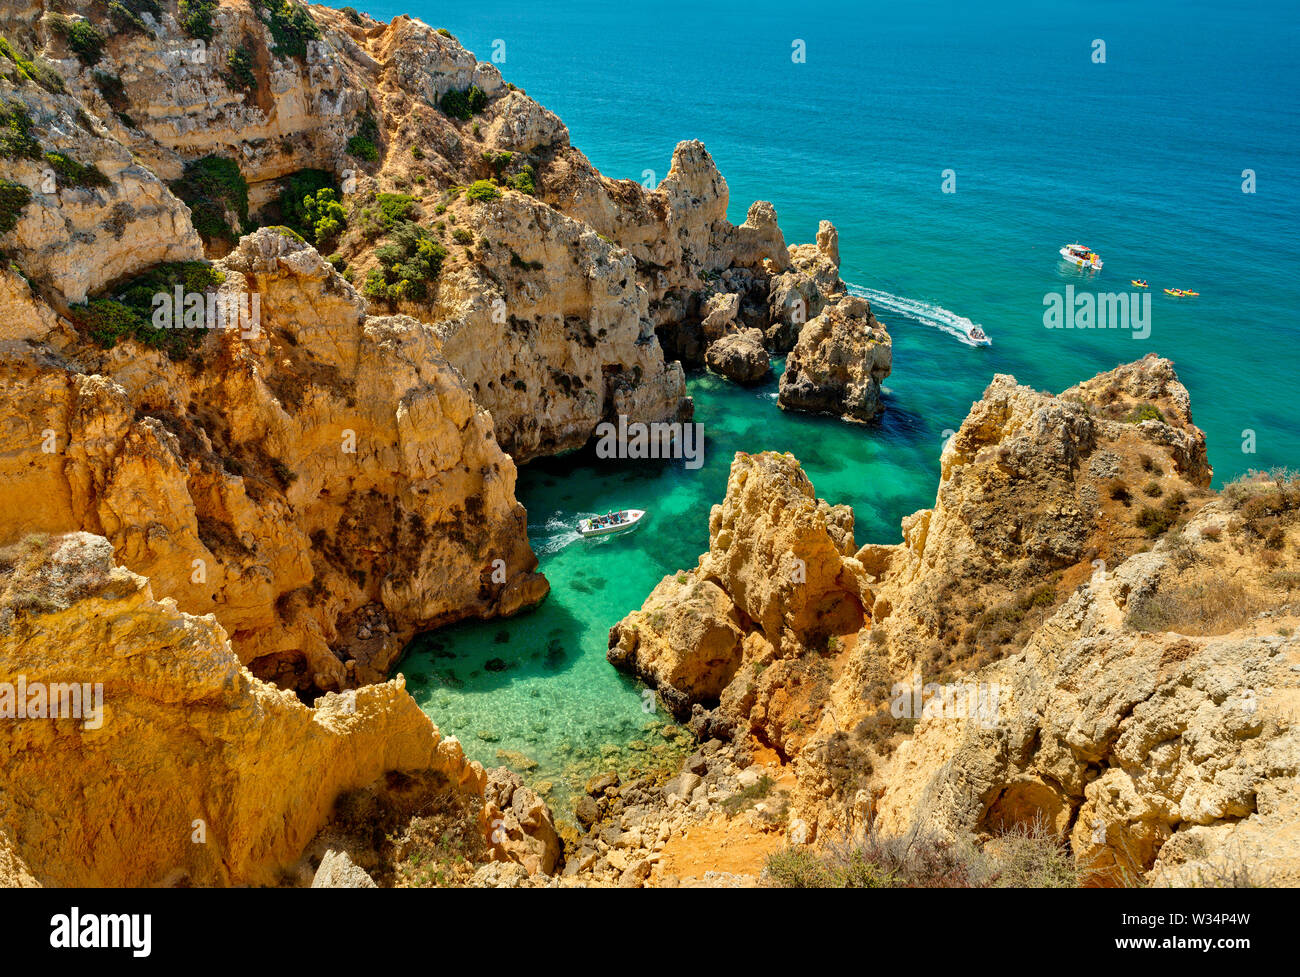 A small inlet near Lagos, the Algarve, with tourist boat trips Stock Photo